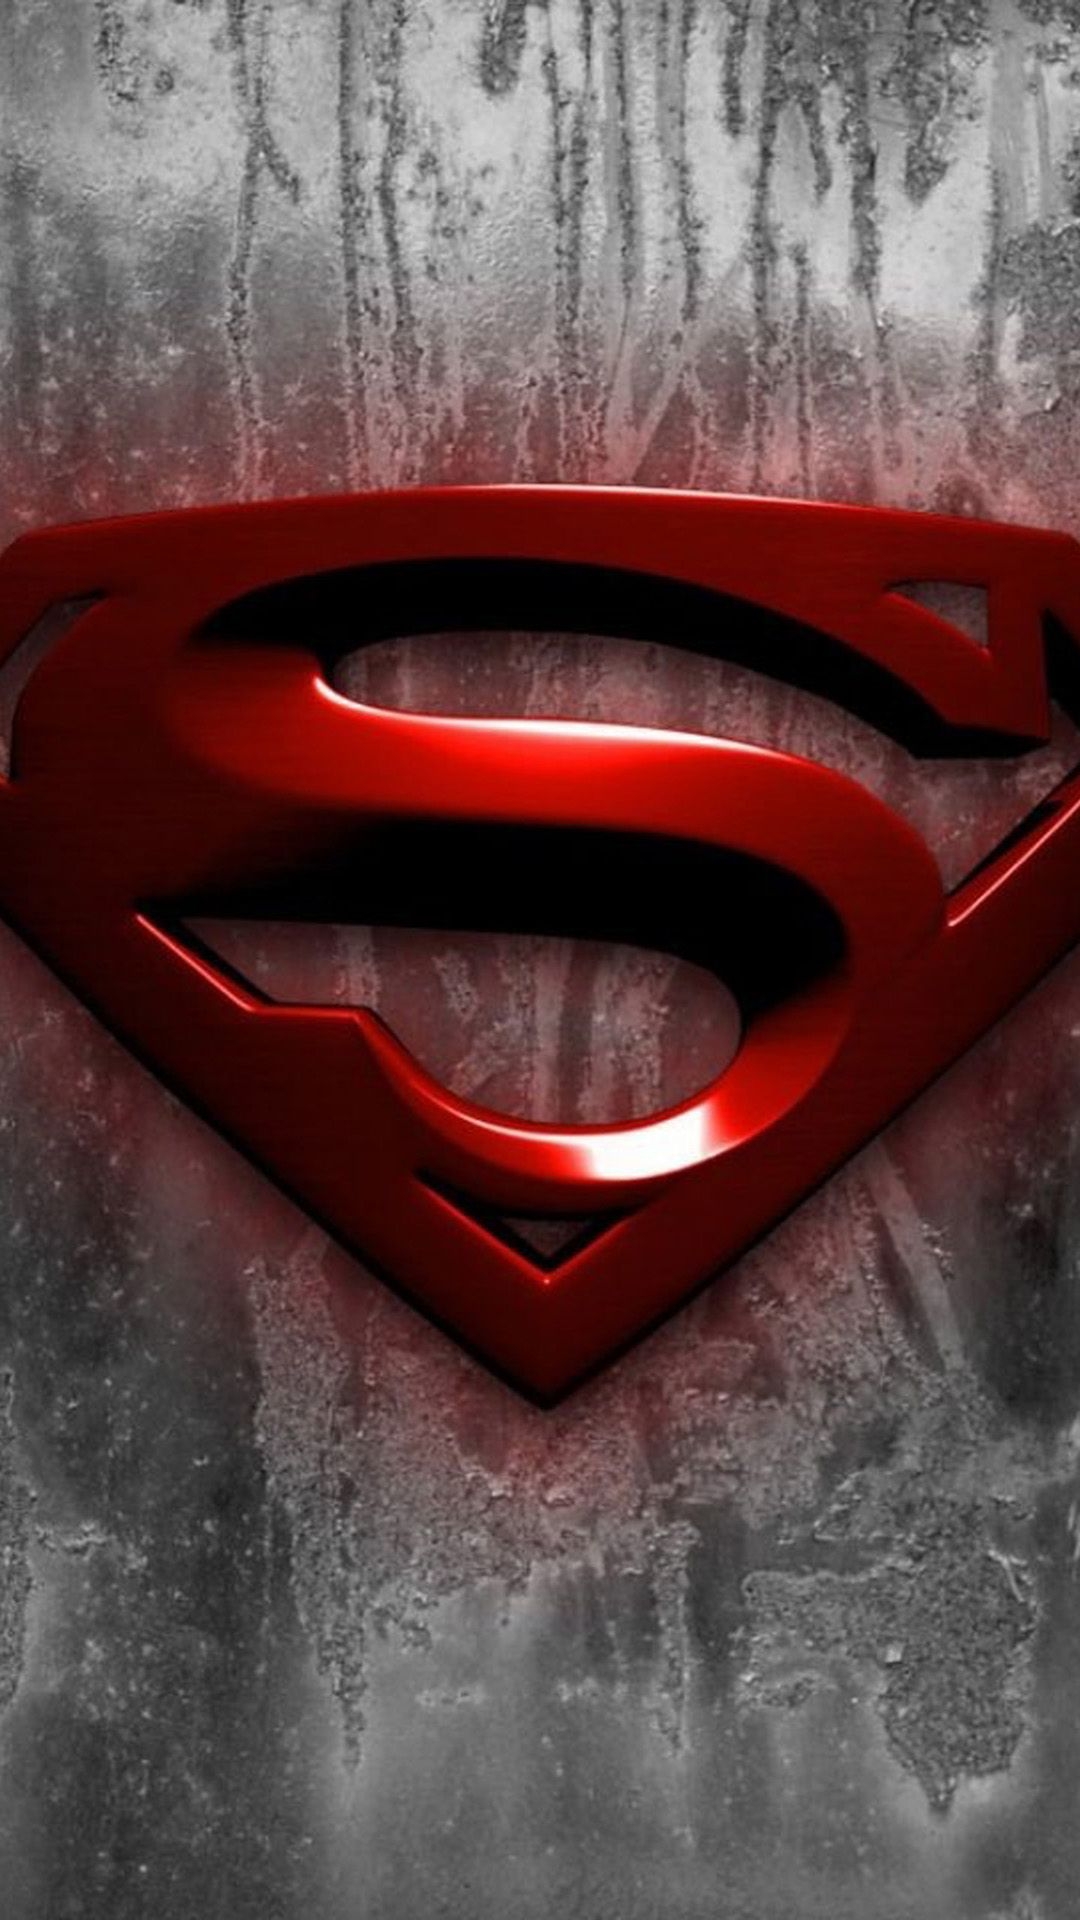 Iphone 6 6s Plus Resolutions - Superman Hd Wallpaper For Phone , HD Wallpaper & Backgrounds